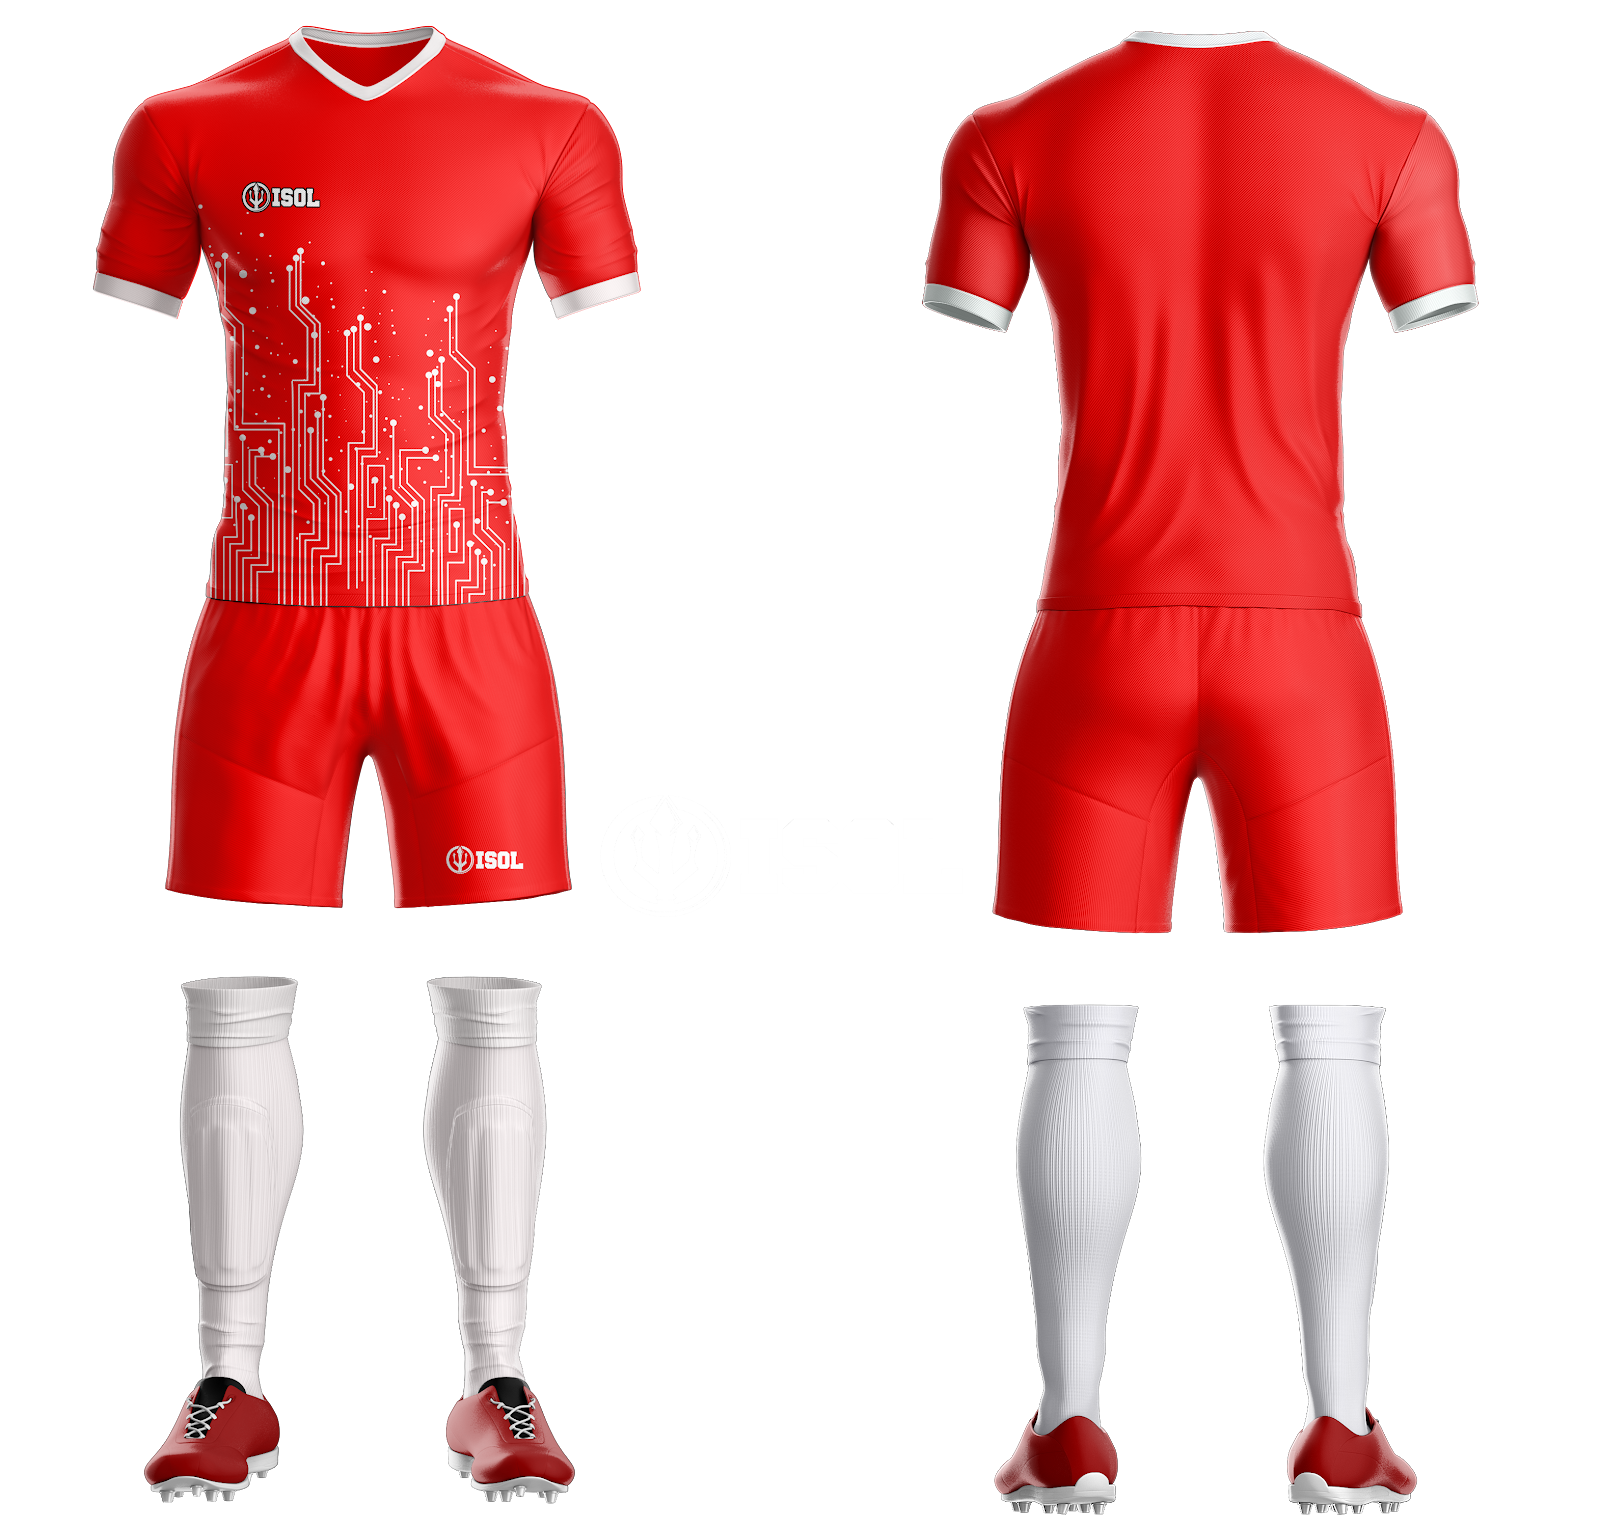 Download 365+ Mentahan Mockup Jersey Futsal Polos Png Popular Mockups these mockups if you need to present your logo and other branding projects.